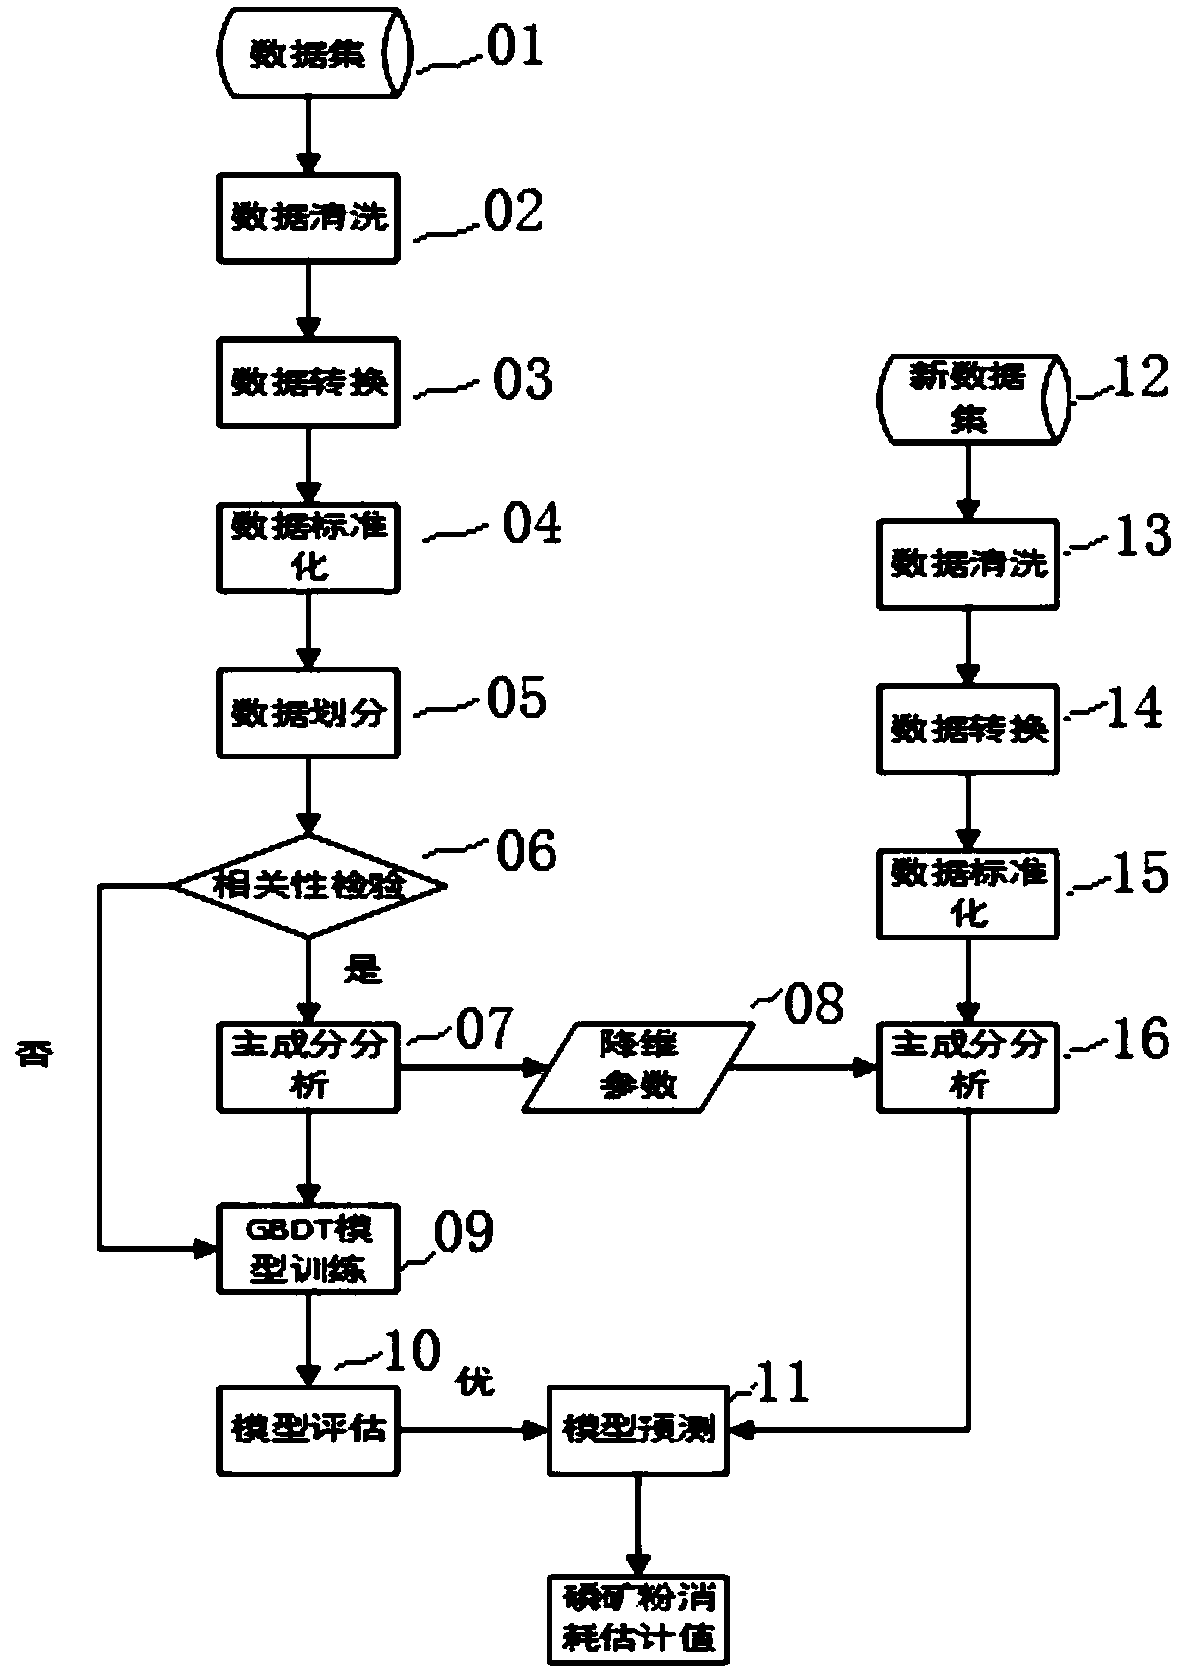 Phosphoric acid production parameter control method based on gradient boosted decision tree